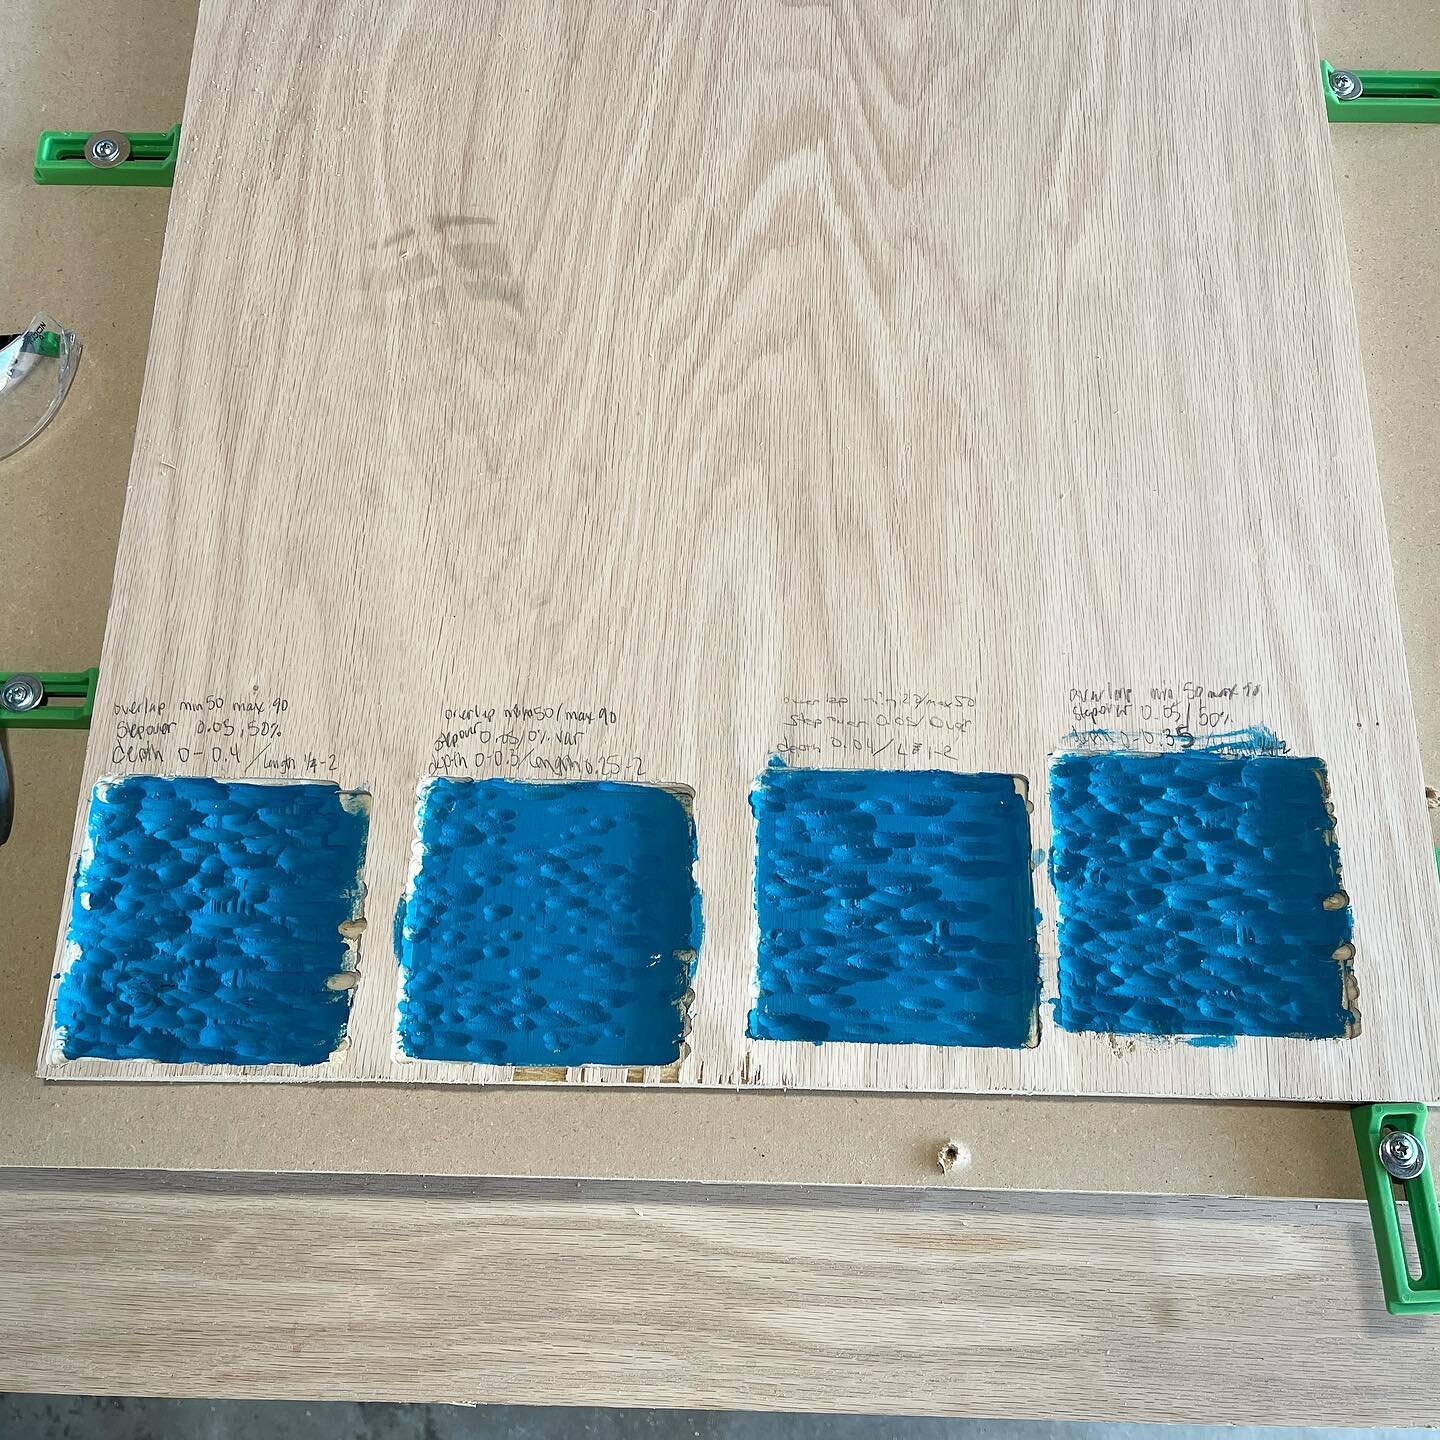 This weekend&rsquo;s project was testing out different settings on the CNC to find the best ocean texture. Which one do you think looks the best? (Let&rsquo;s number them 1 to 4, with 1 on the left and 4 on the right.)